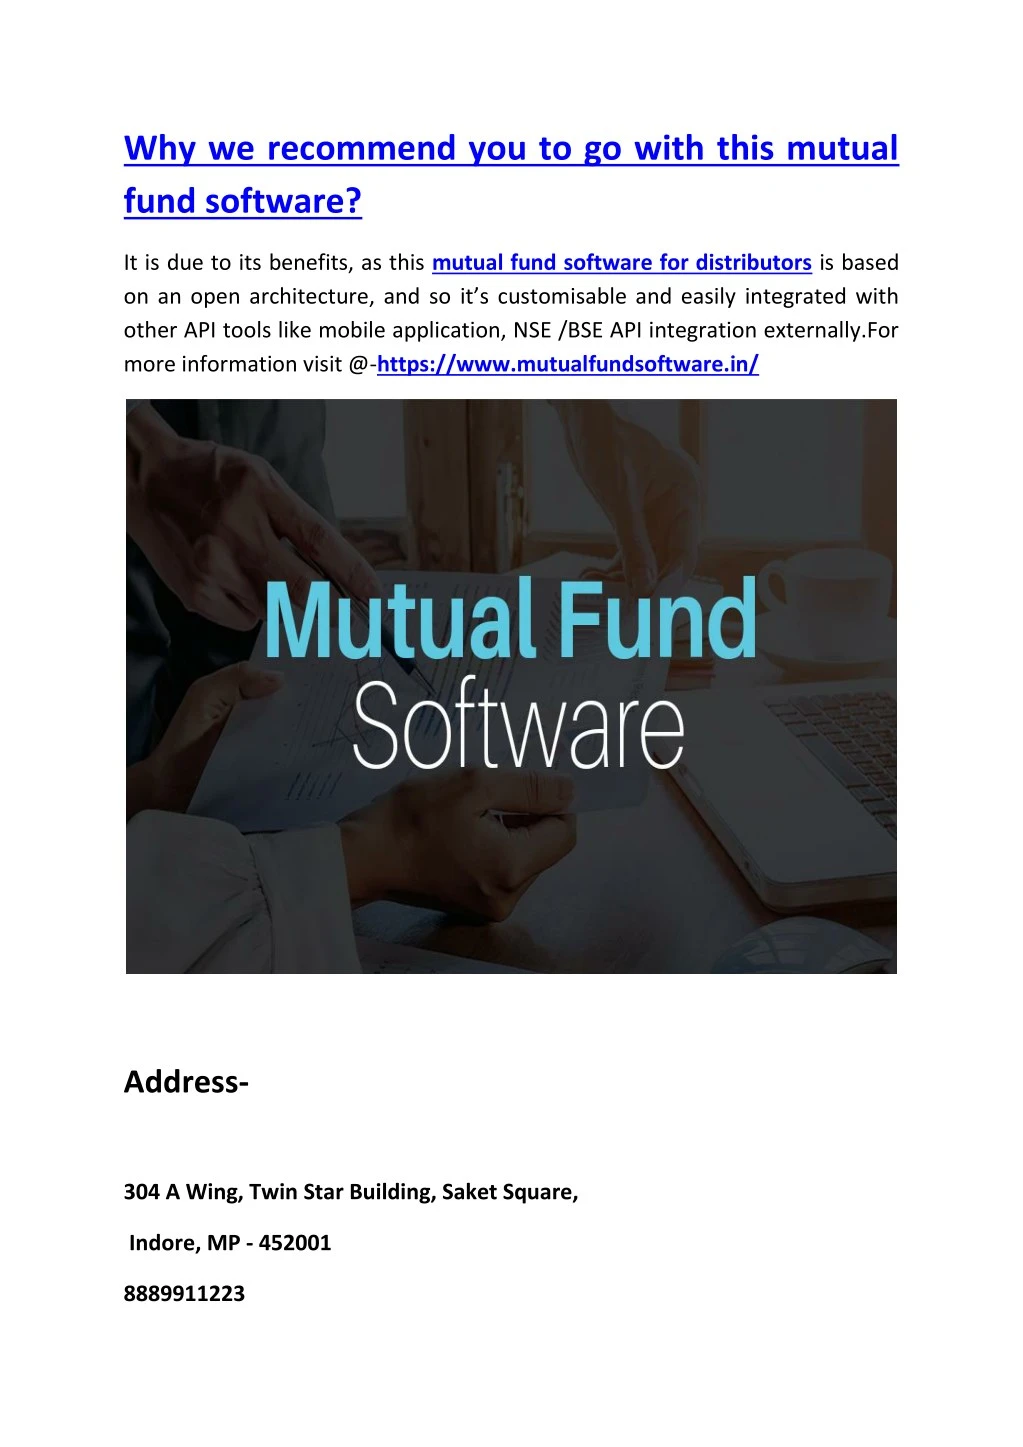 why we recommend you to go with this mutual fund